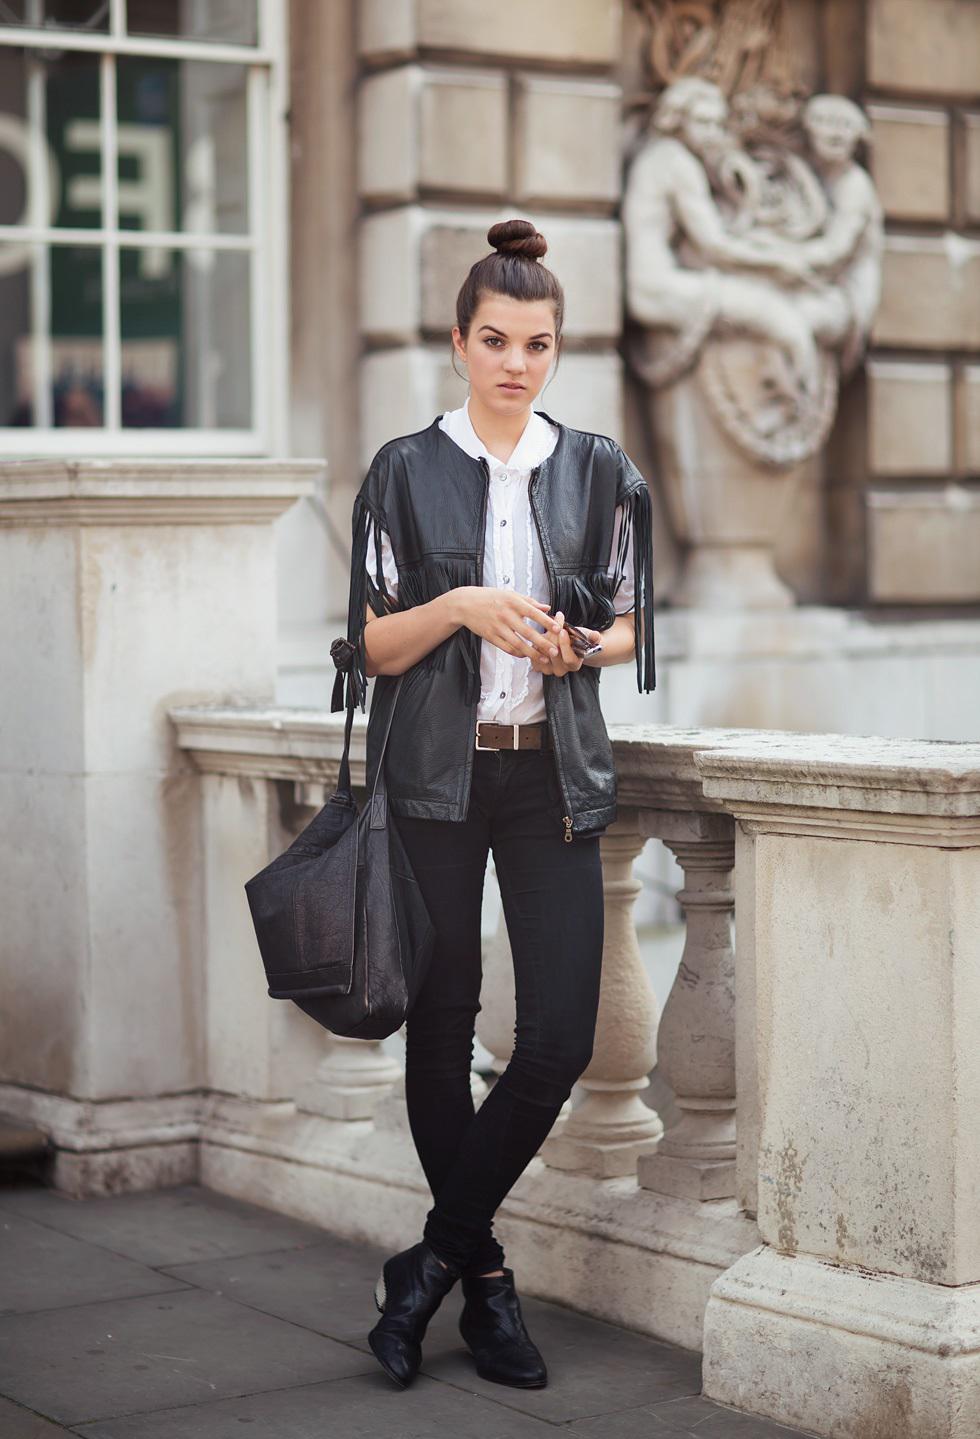 Twist & roll top bun and black outfit:: High-Heeled Shoe,  Boot Outfits,  Fashion week,  Top knot,  top bun  